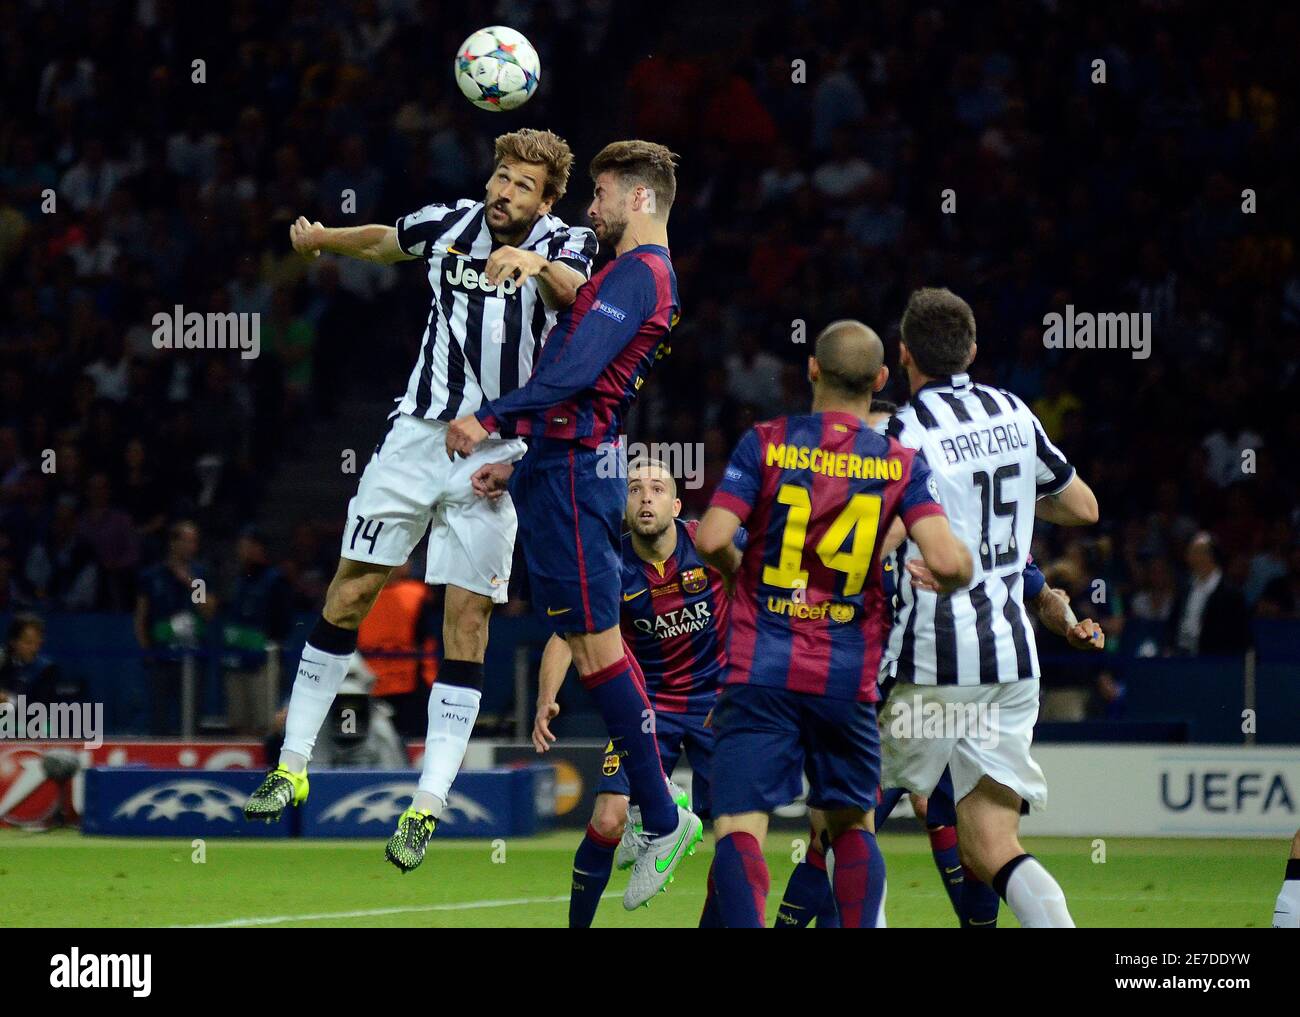 BERLIN, GERMANY - JUNE 6, 2015: Fernando Llorente pictured during the 2014/15 UEFA Champions League Final between Juventus Torino and FC Barcelona at Olympiastadion. Stock Photo